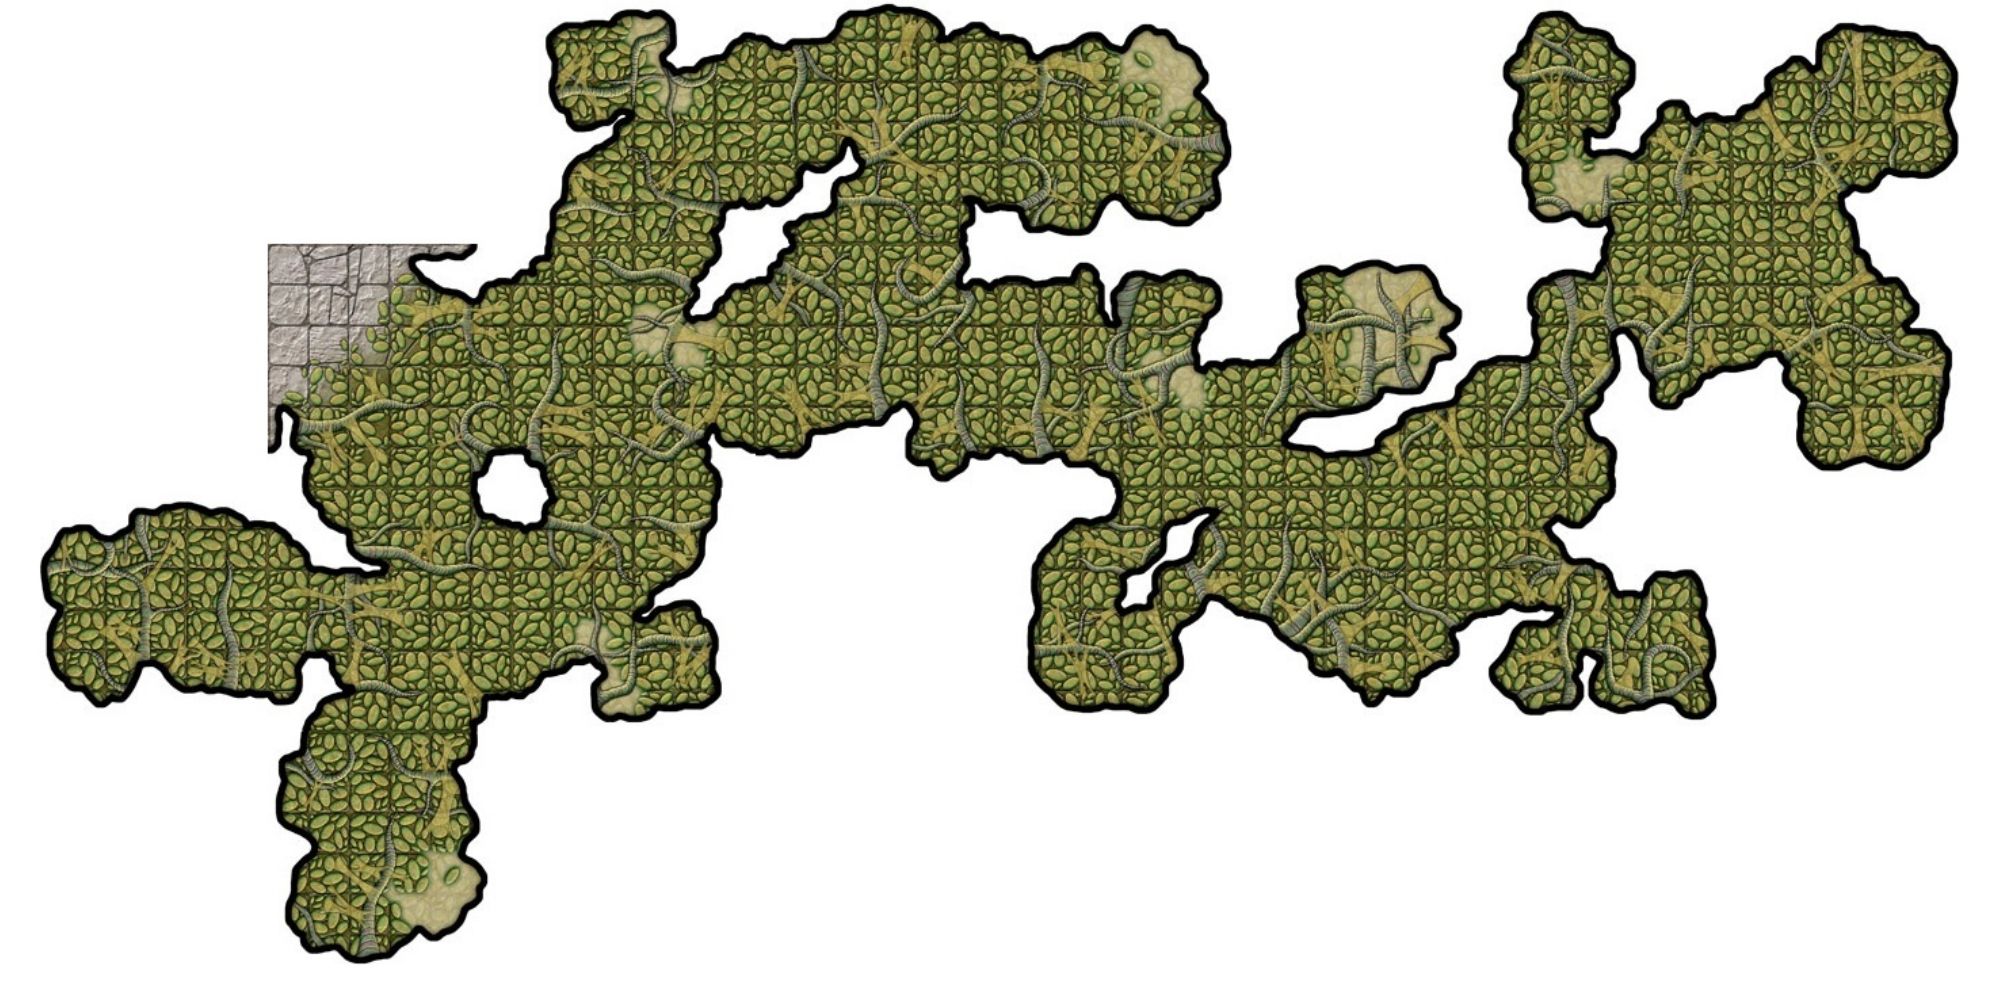 Huge cave dungeon map